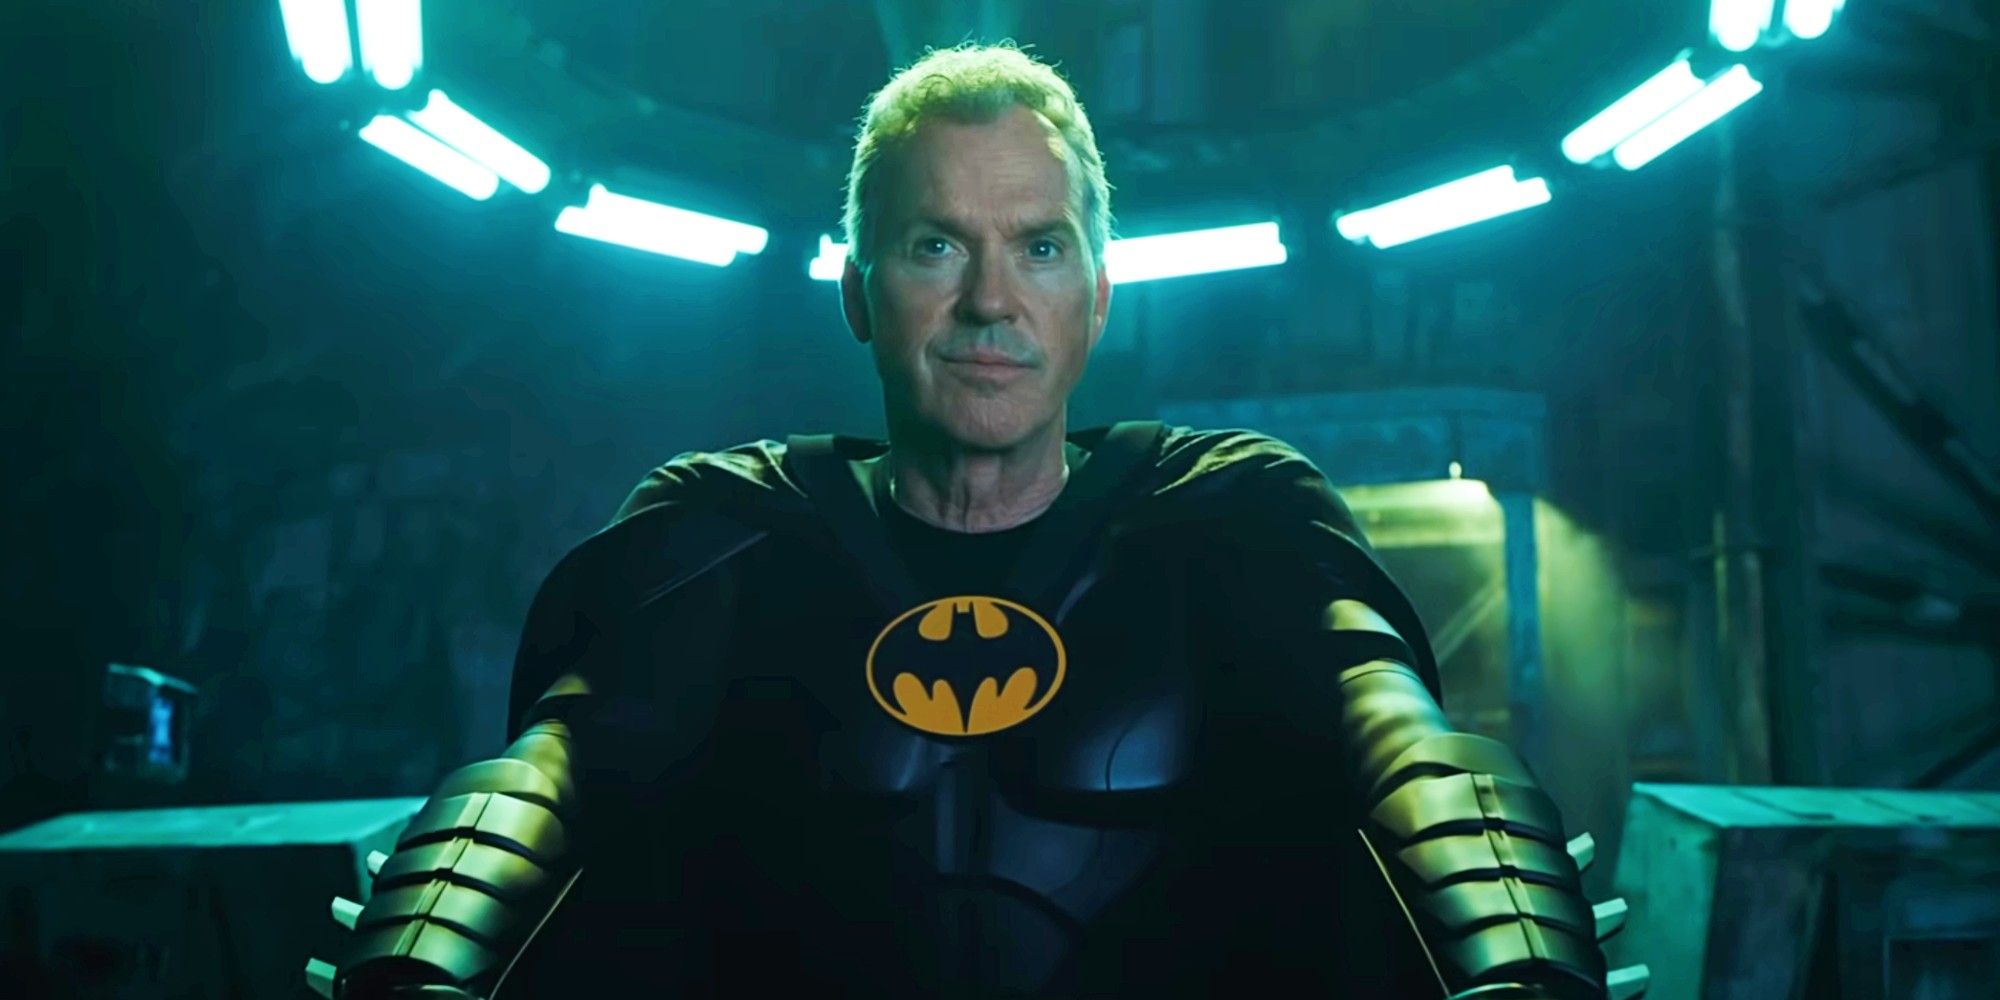 Michael Keaton as Batman in the Batcave Wearing His Batsuit in The Flash Movie